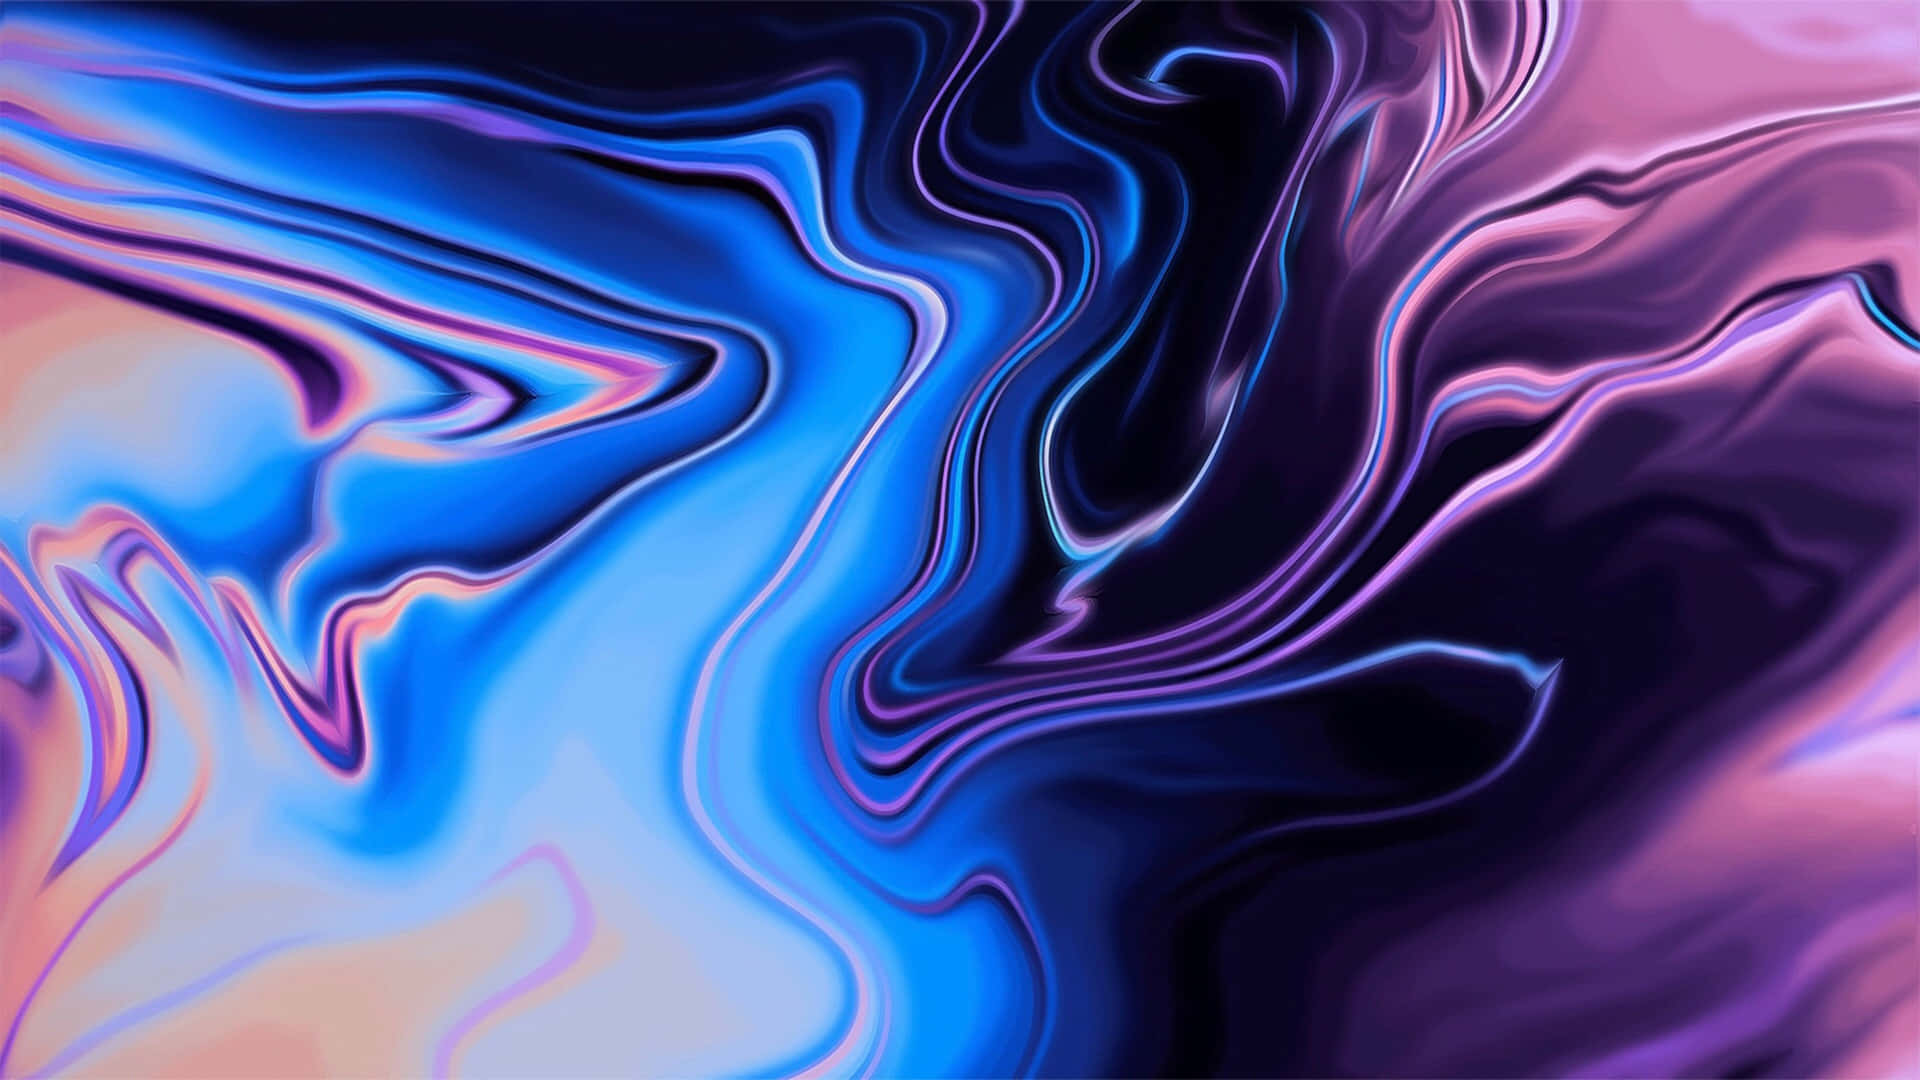 A Purple And Blue Abstract Background With Swirls Wallpaper